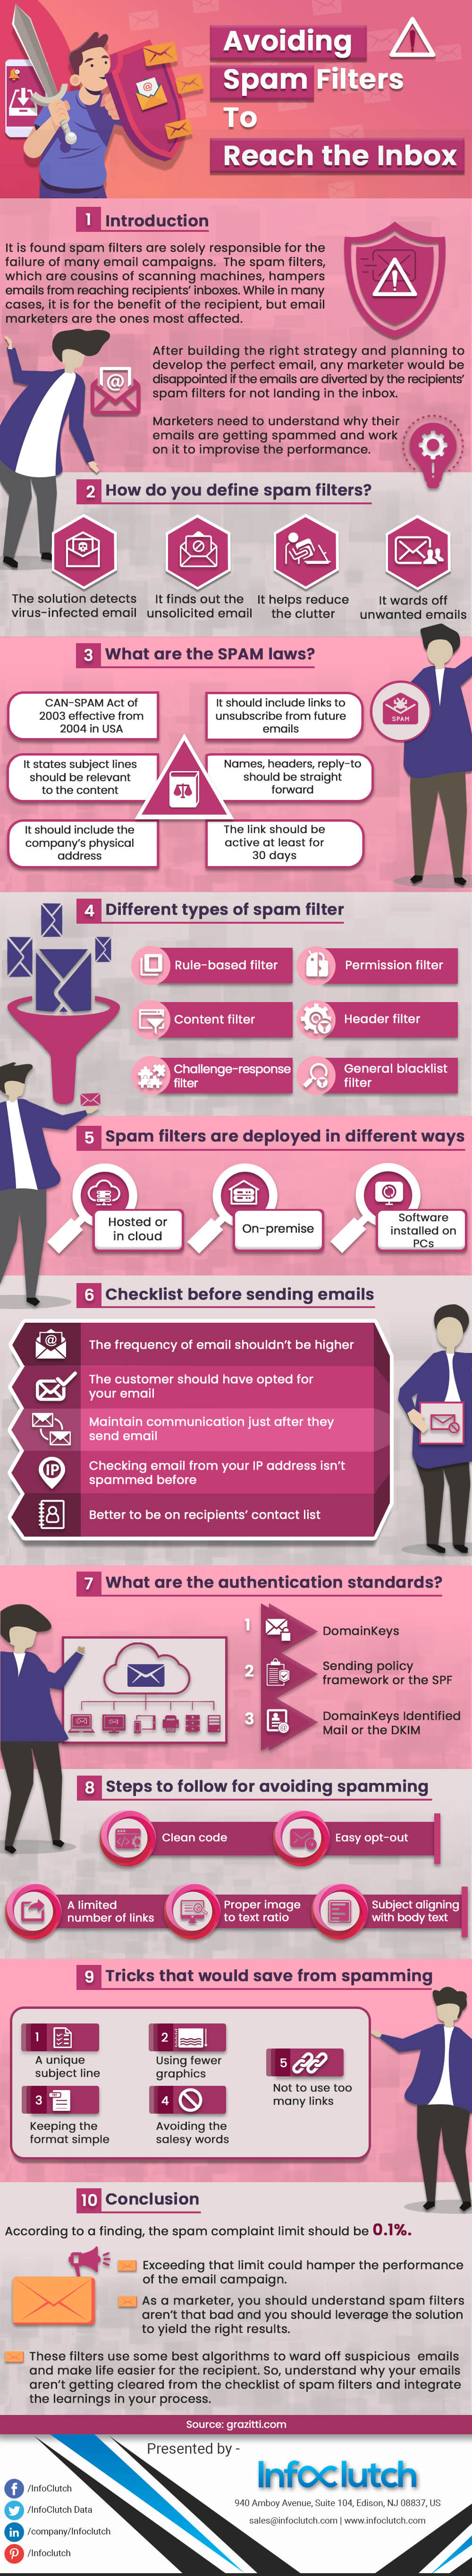 Avoiding Spam Filters to Reach the Inbox